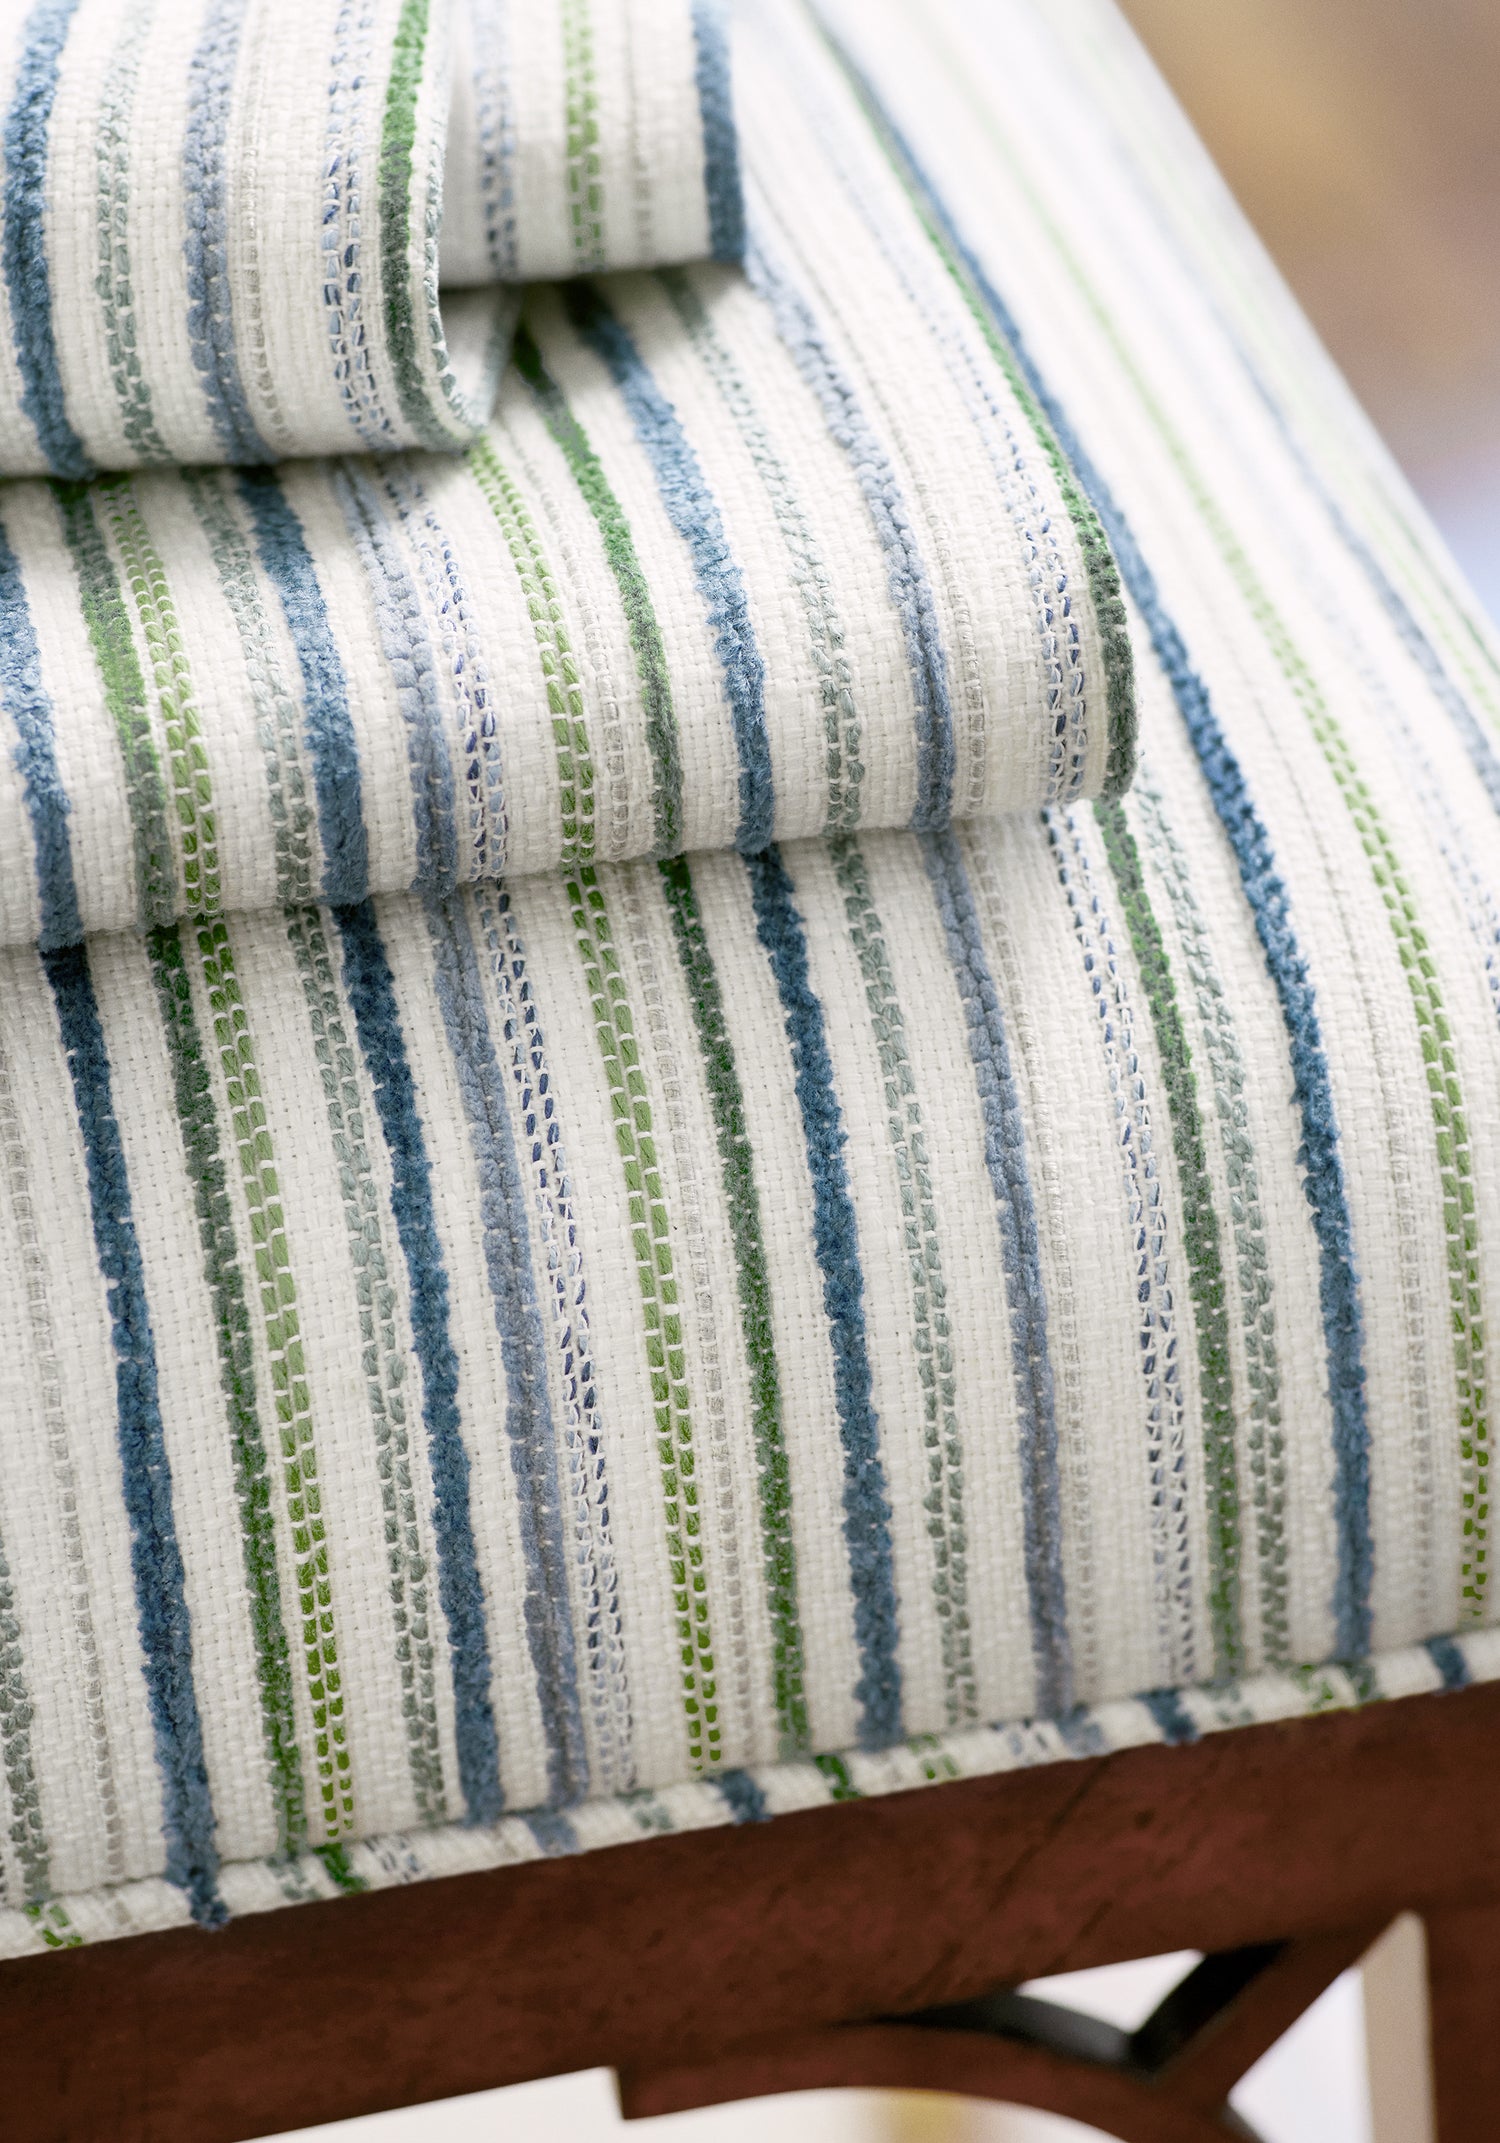 Detailed Ernie Stripe woven fabric in whirlpool color, pattern number W81945 of the Anna French Bristol collection